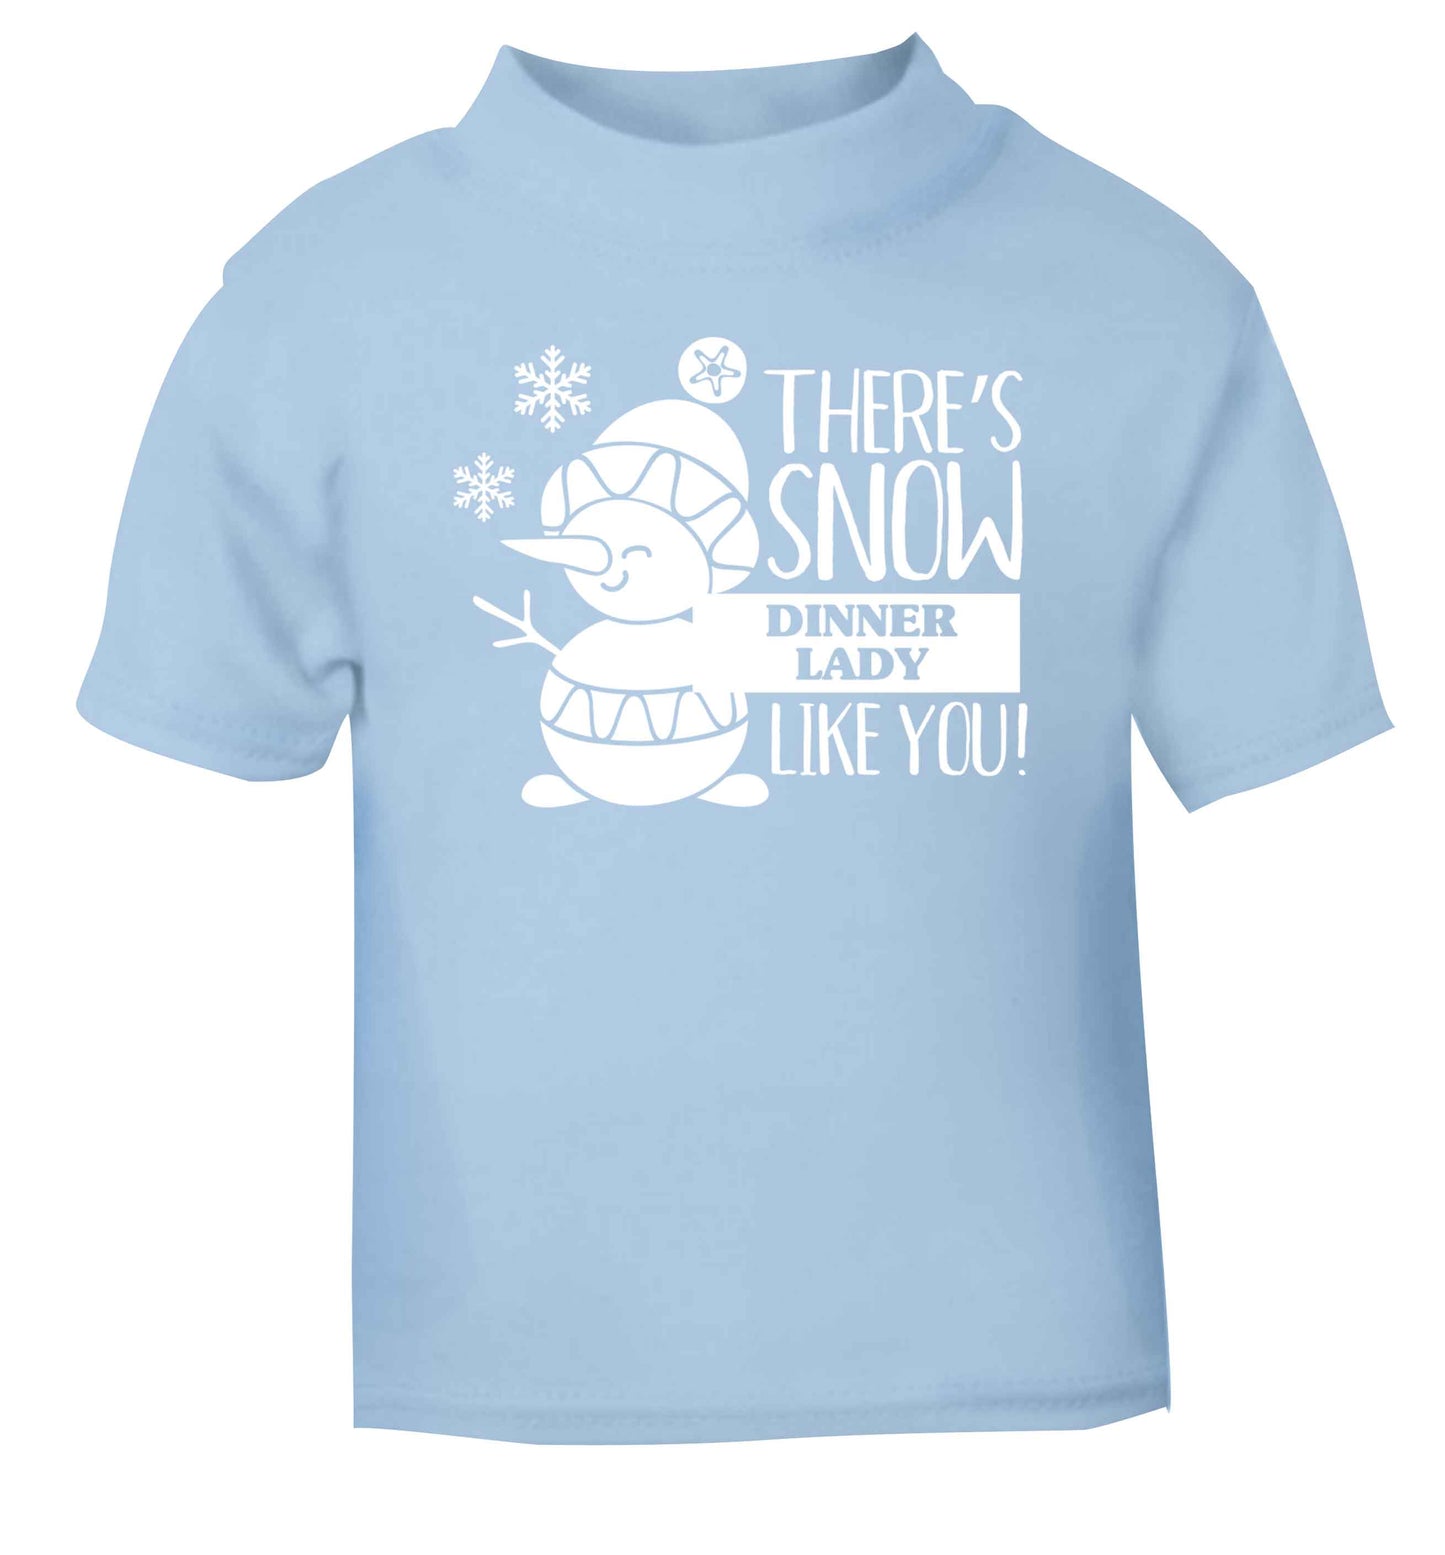 There's snow dinner lady like you light blue baby toddler Tshirt 2 Years